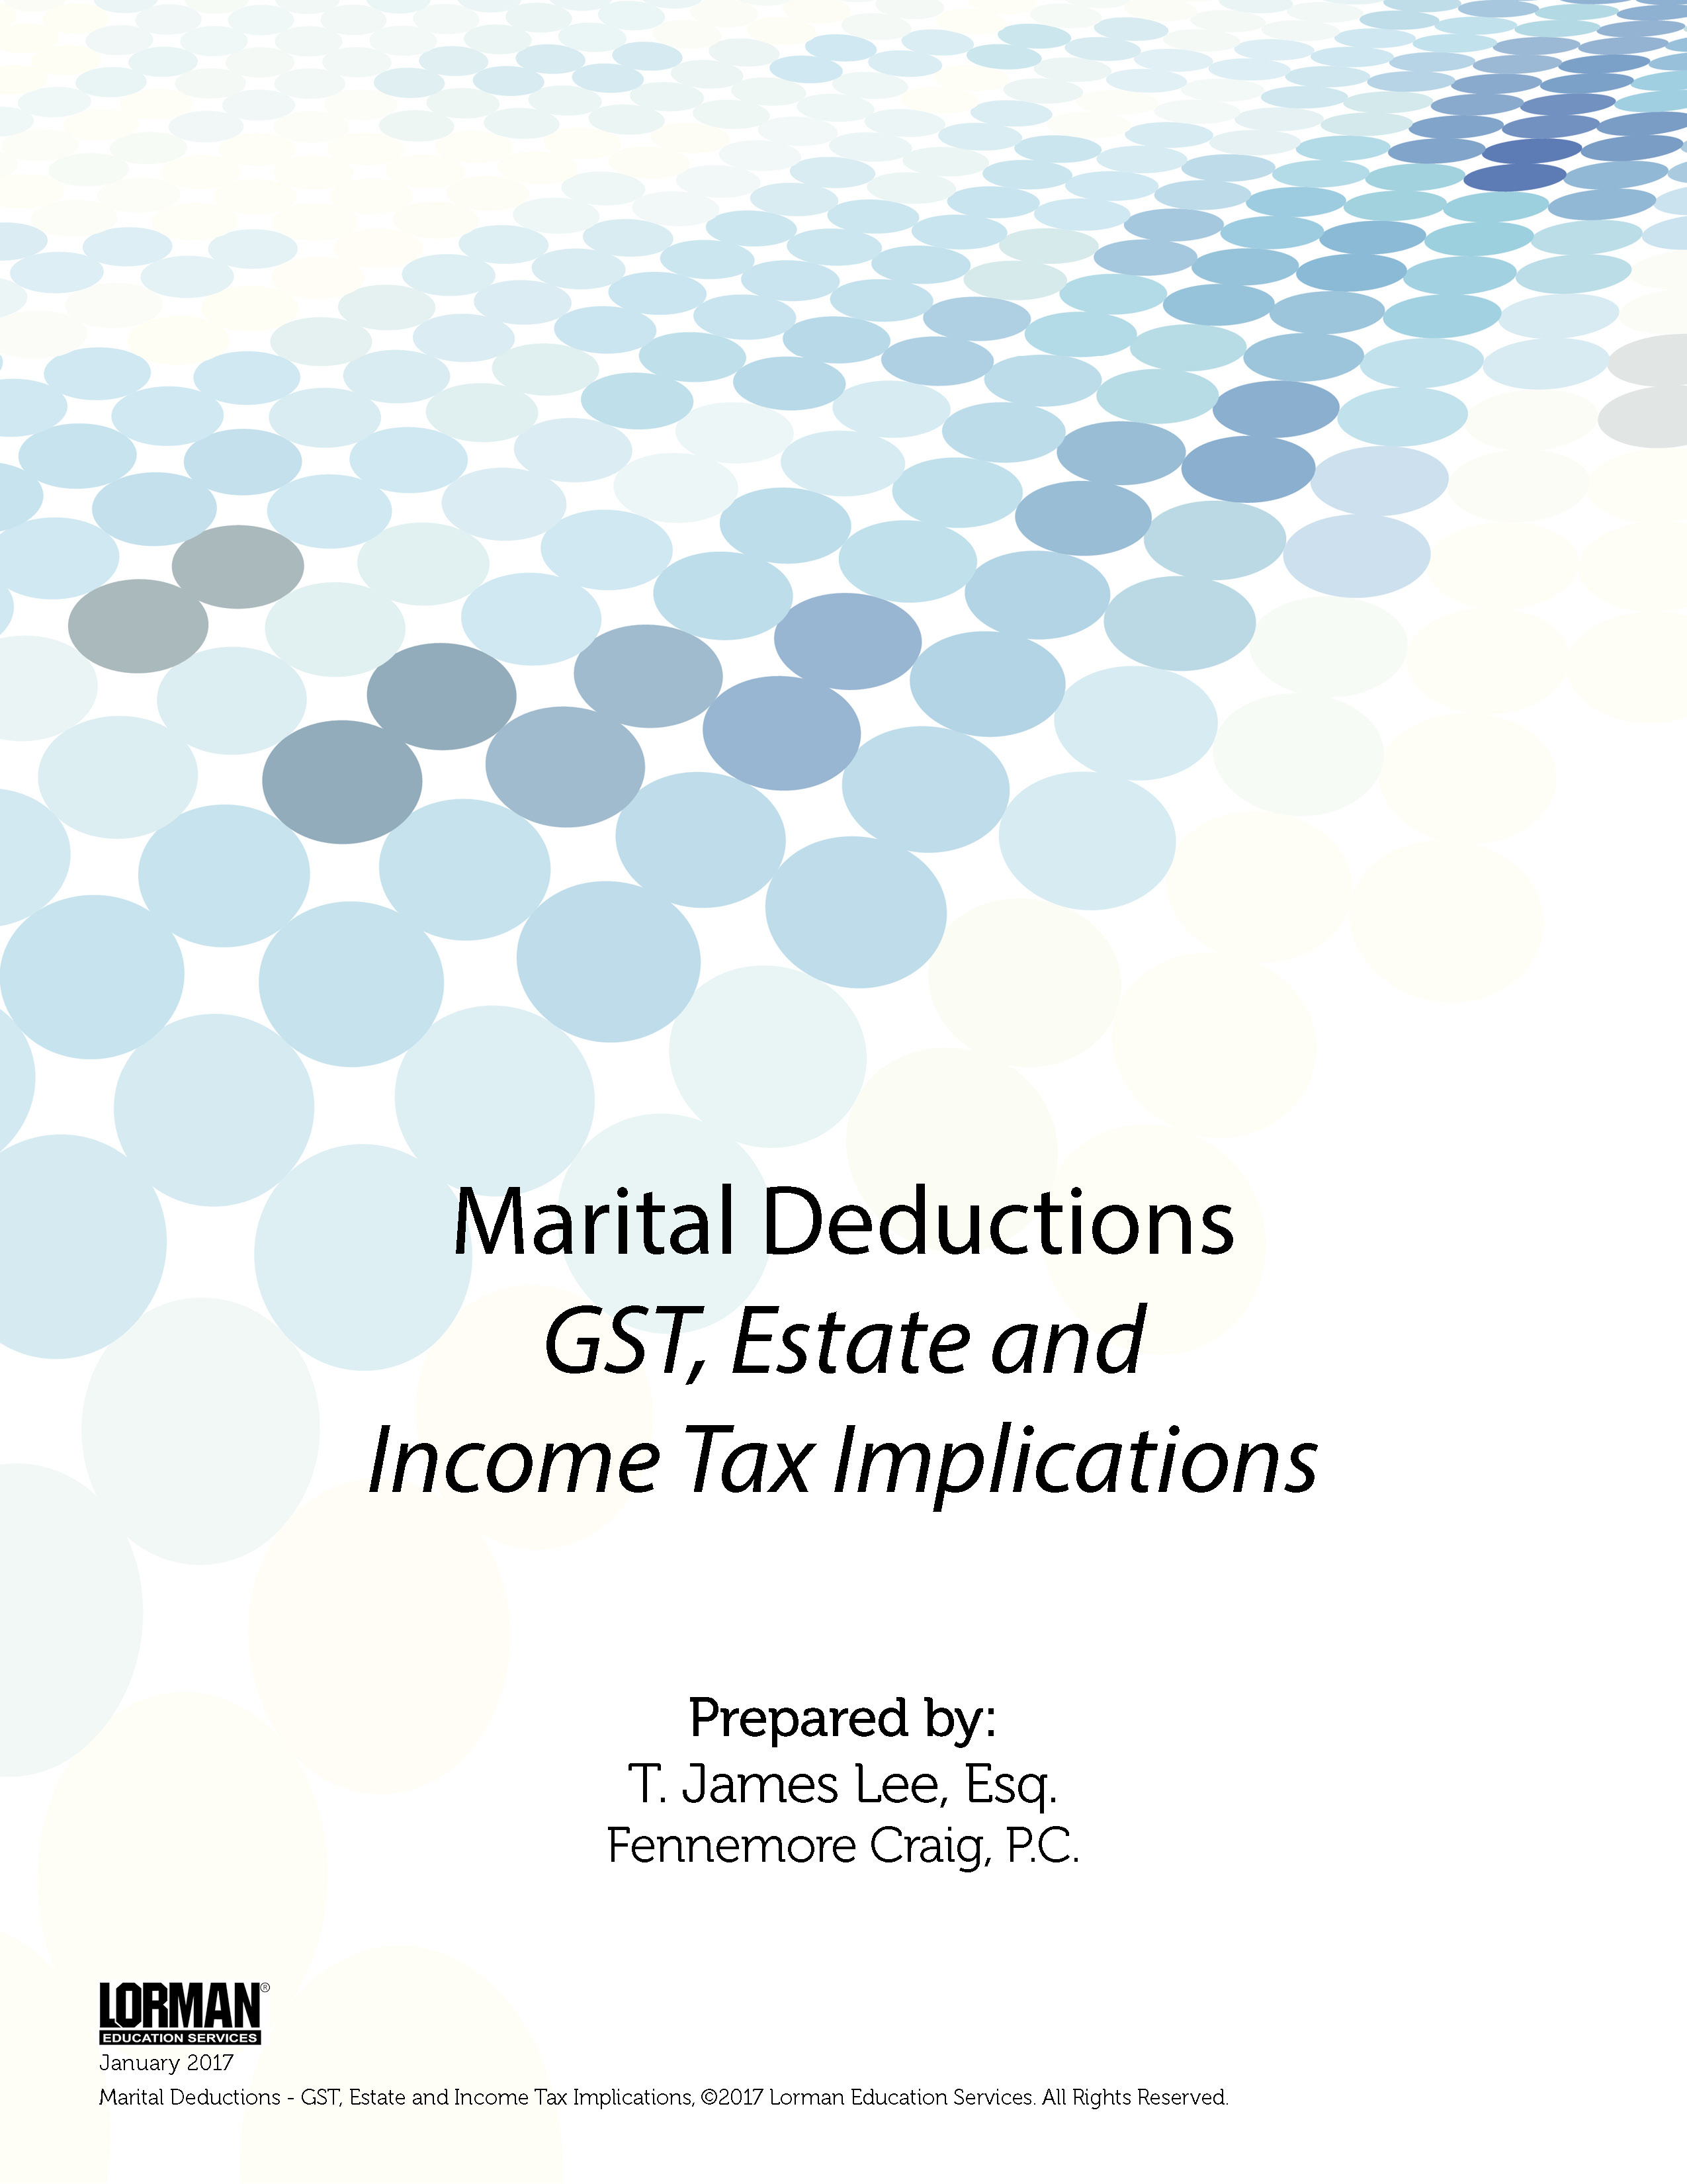 Marital Deductions - GST, Estate and Income Tax Implications